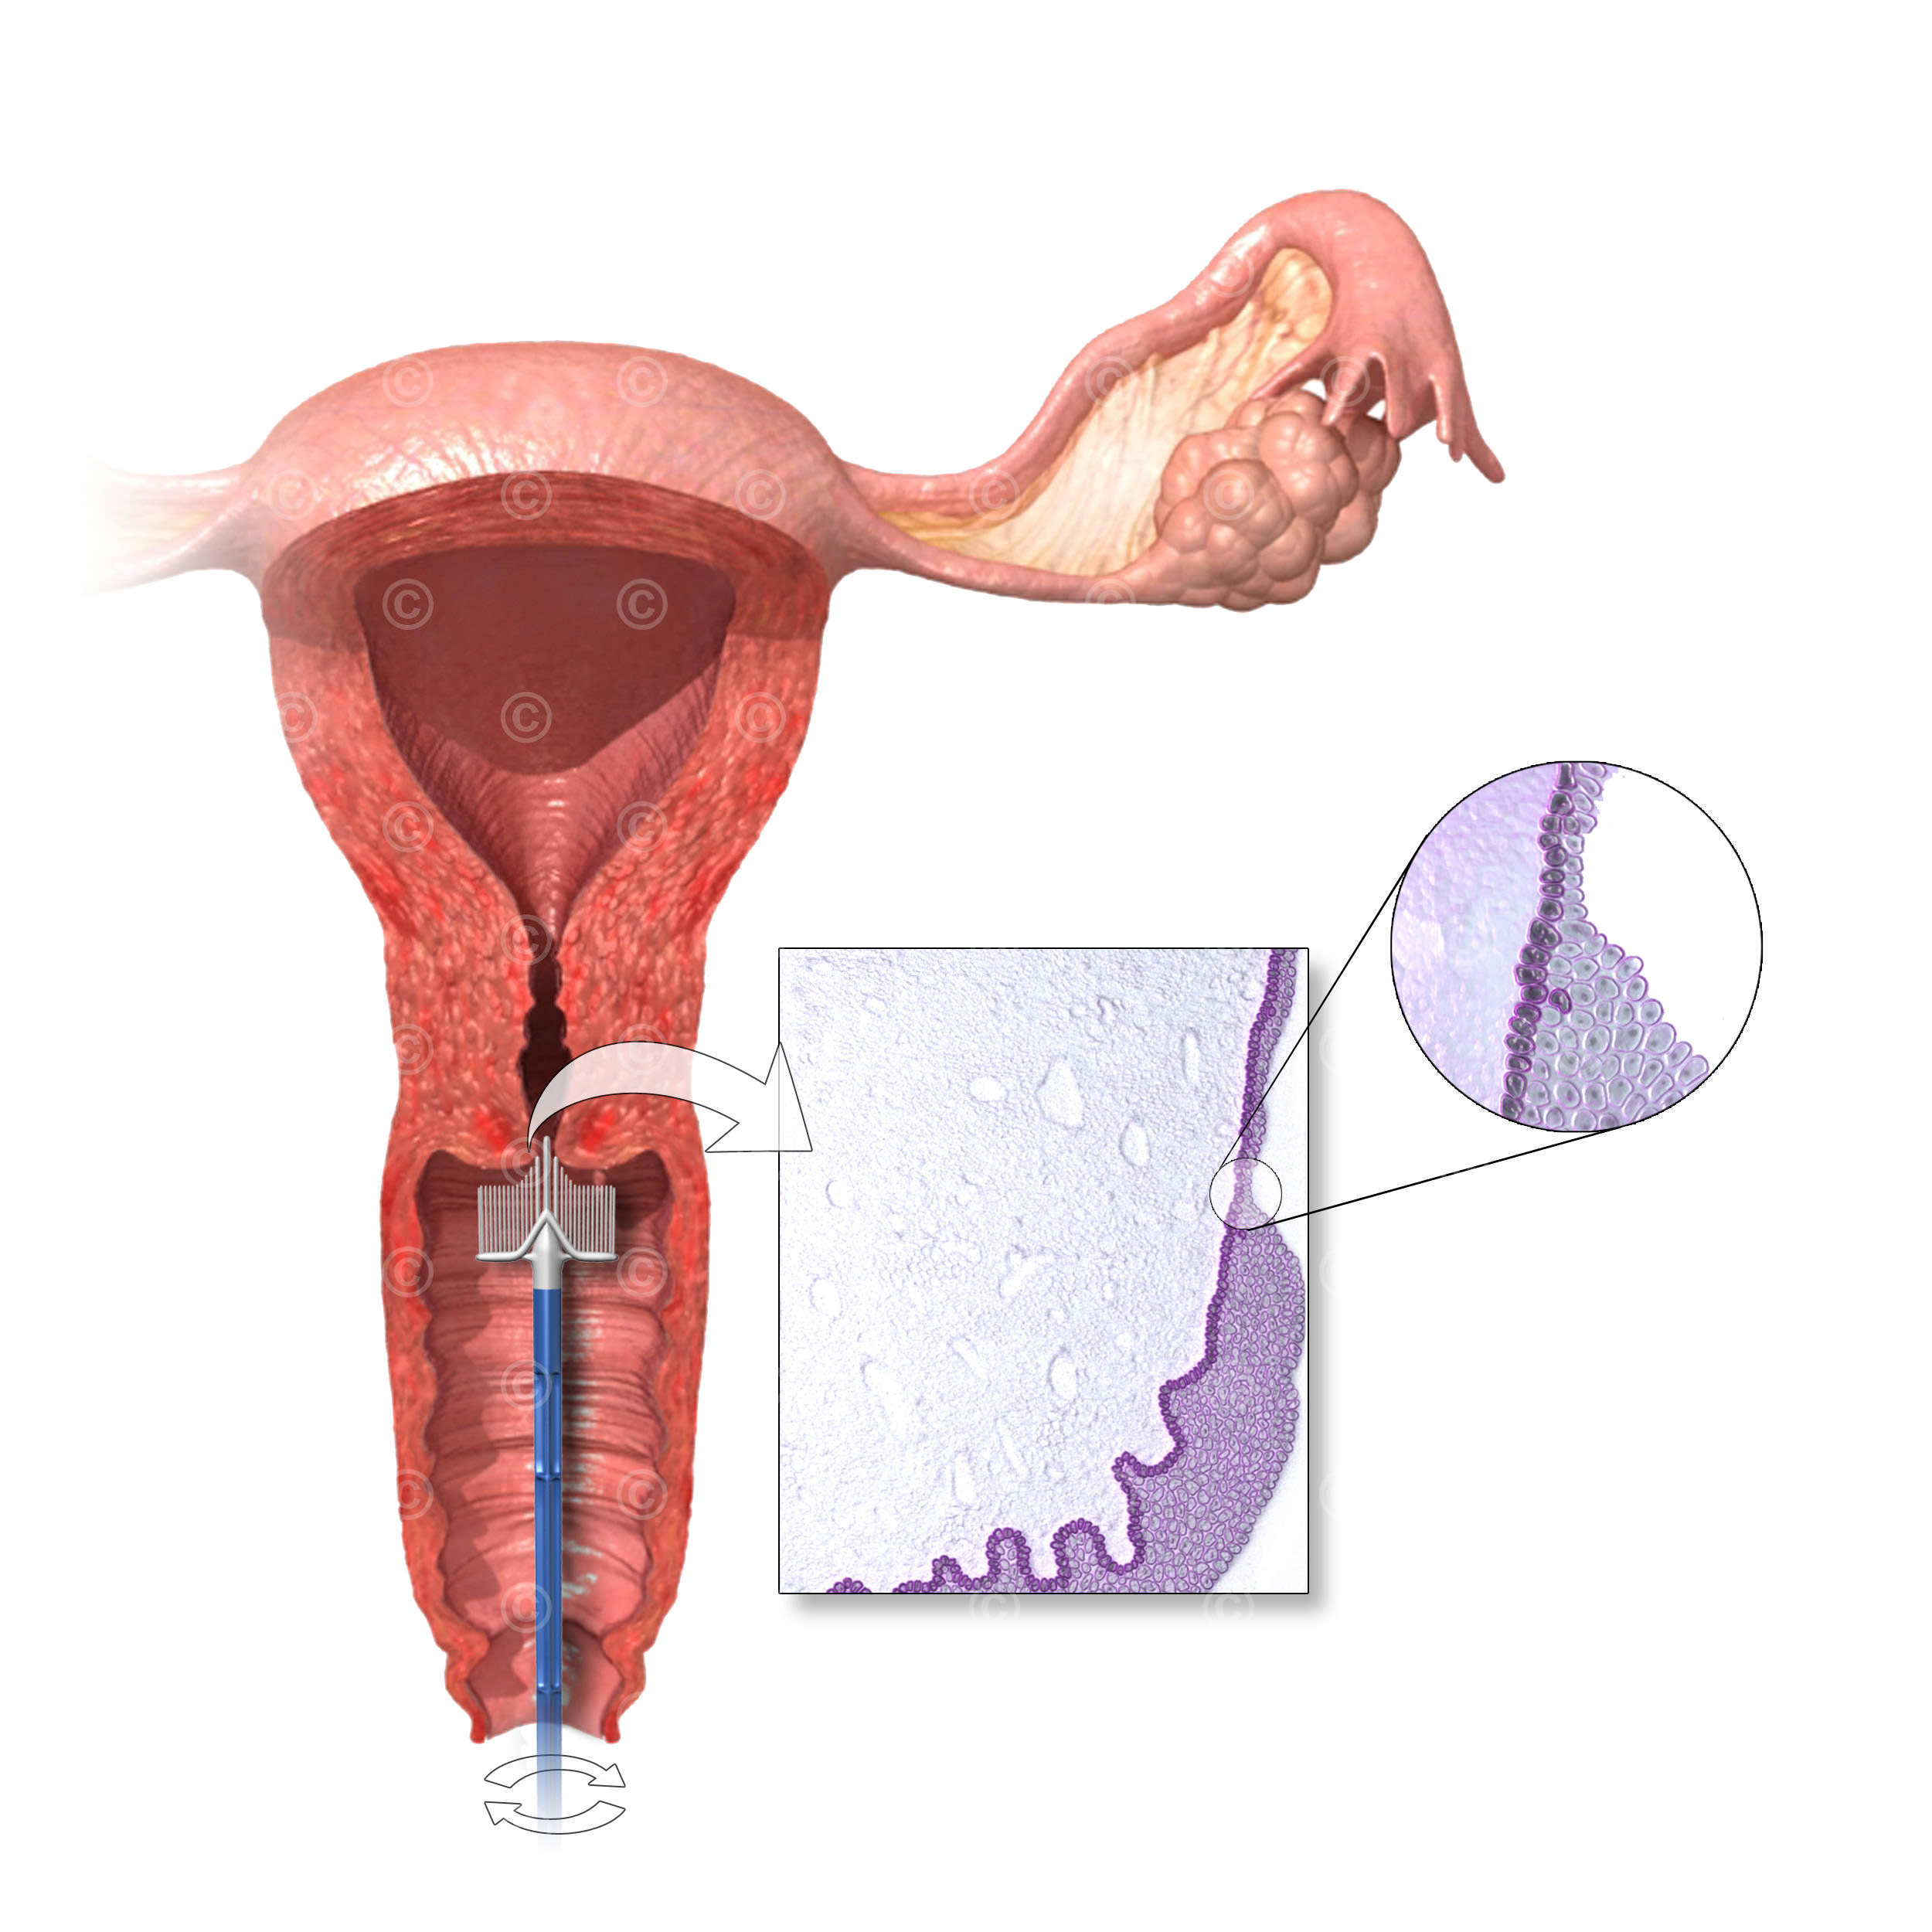 Pap smear cervix and transformation zone 